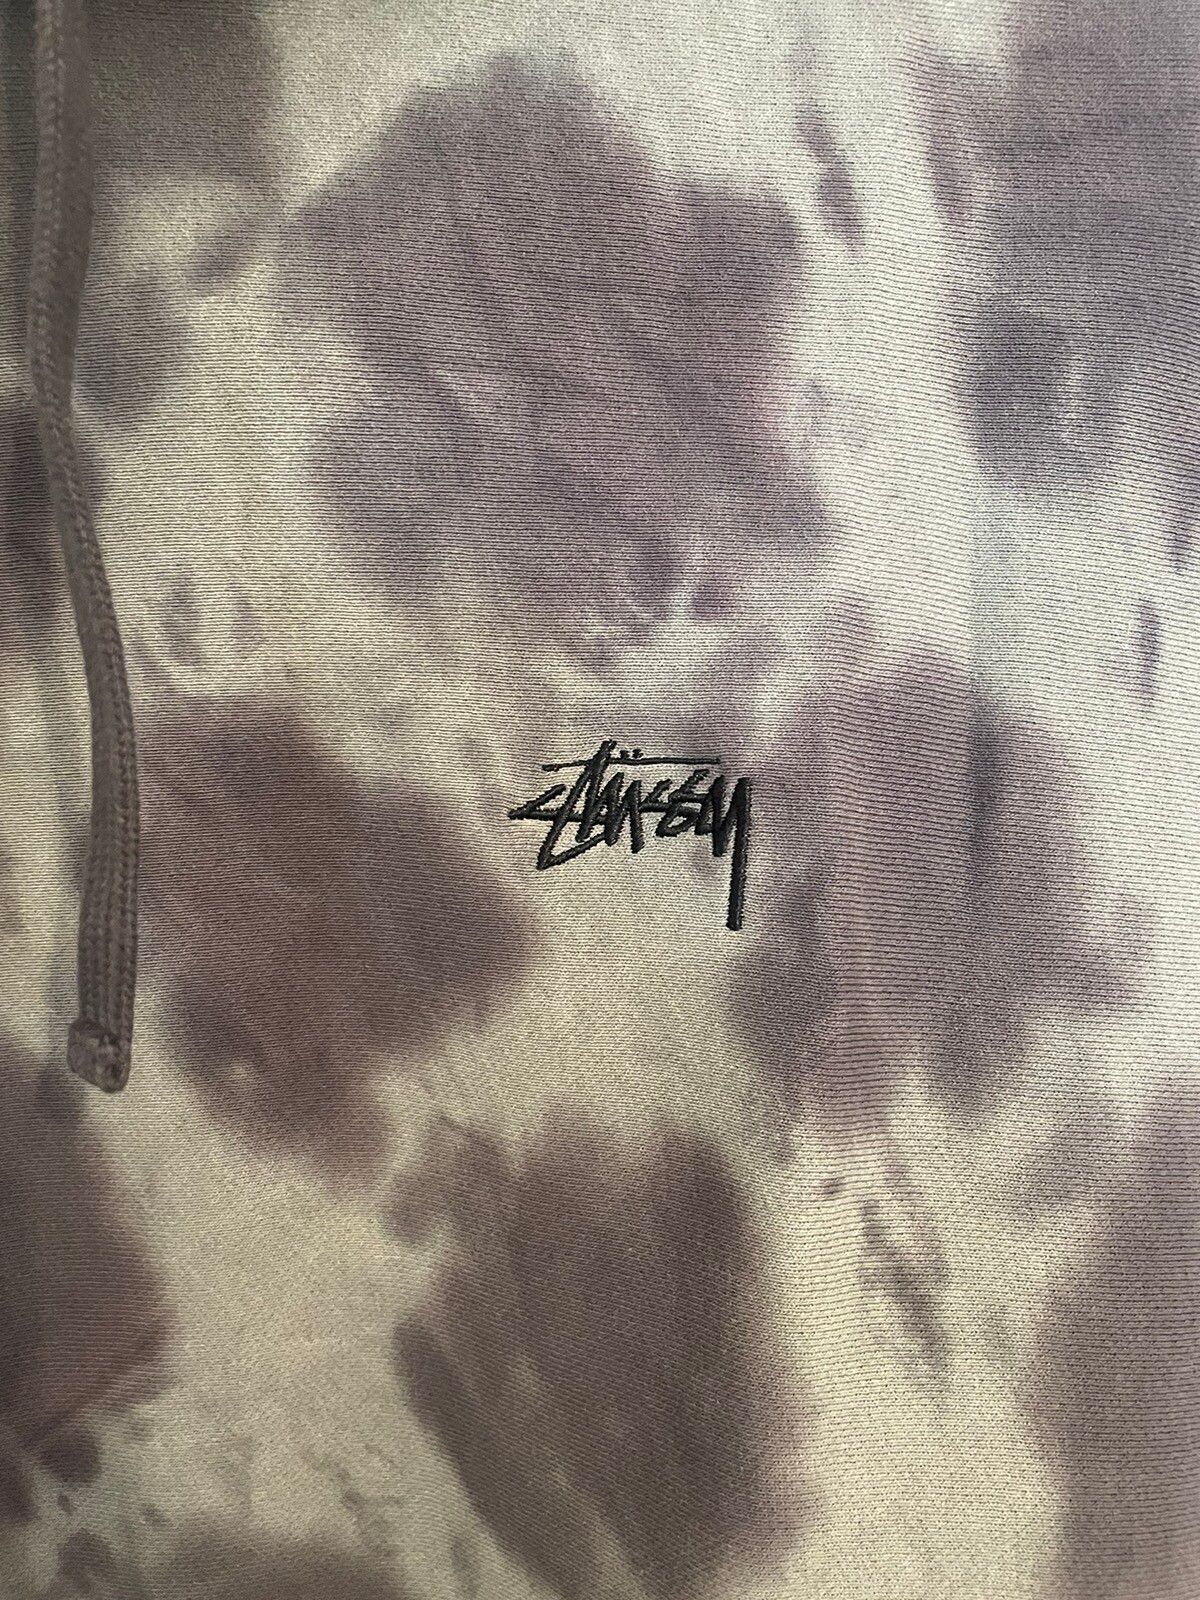 Stussy Stussy Garment Dyed Washed Hoodie Sweatshirt Size Large Size US L / EU 52-54 / 3 - 2 Preview